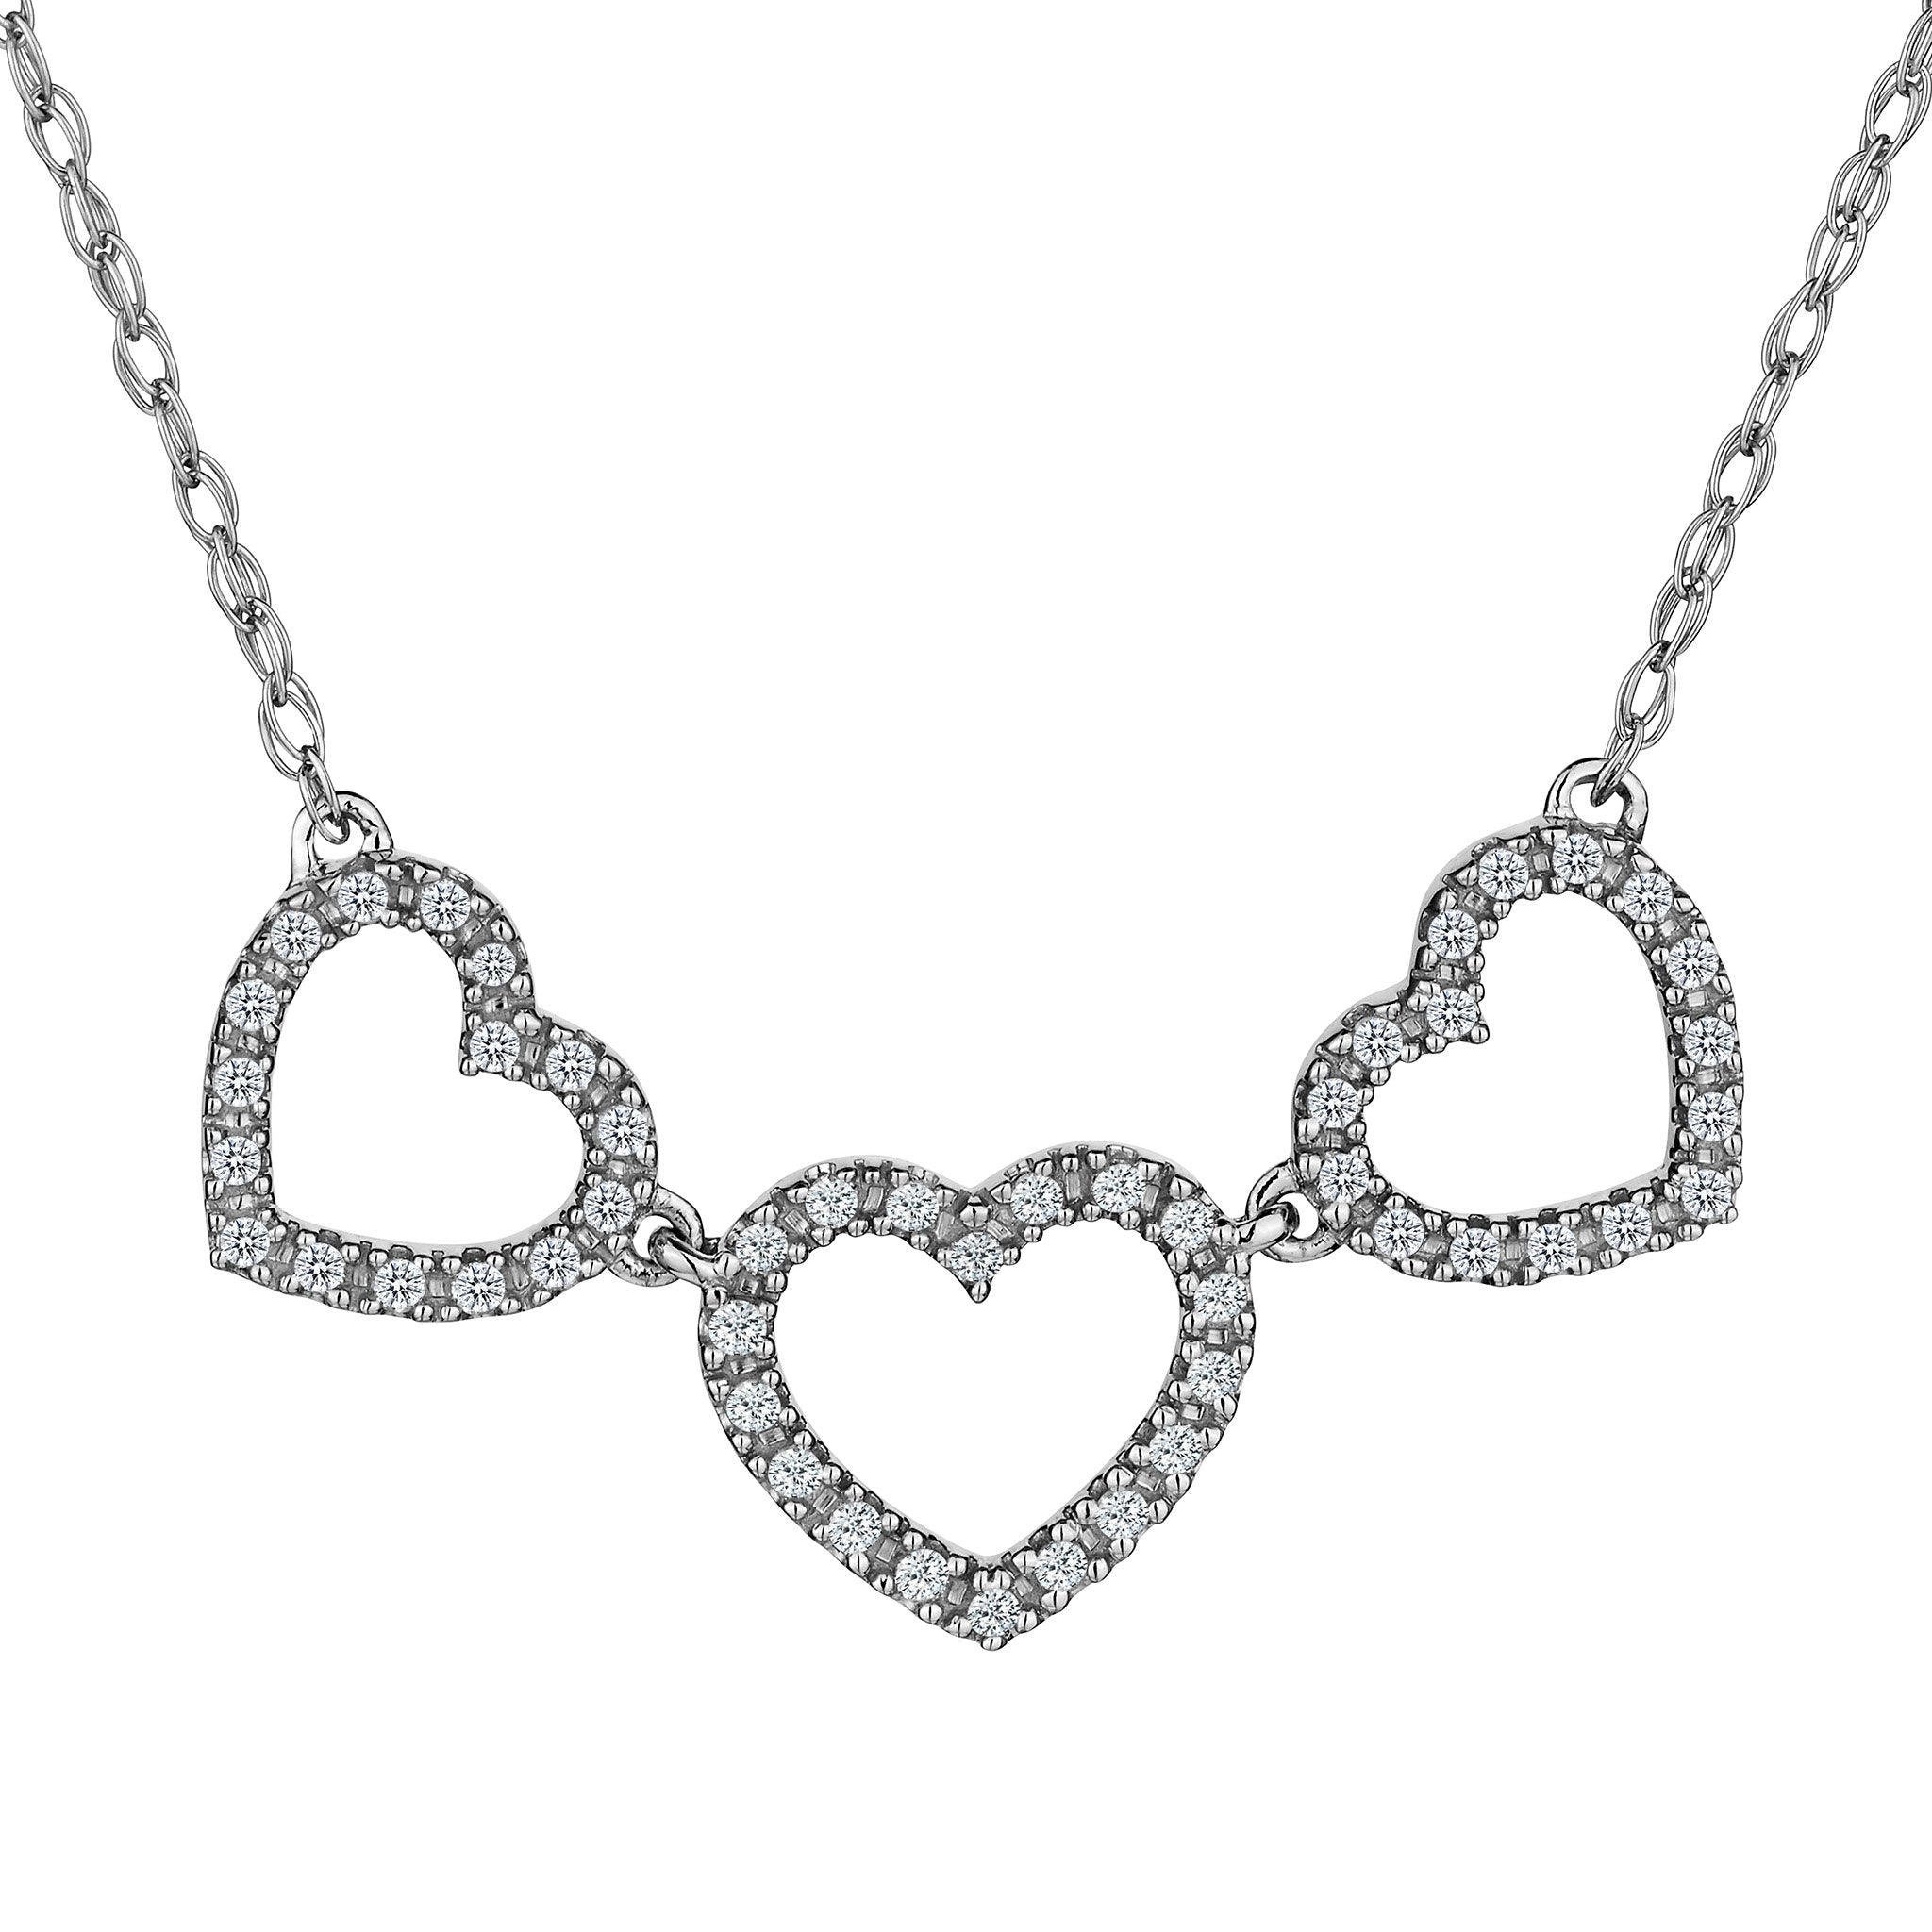 .45 Carat Diamond Three Hearts Pendant Necklace,  10kt White Gold. Necklaces and Pendants. Griffin Jewellery Designs. 